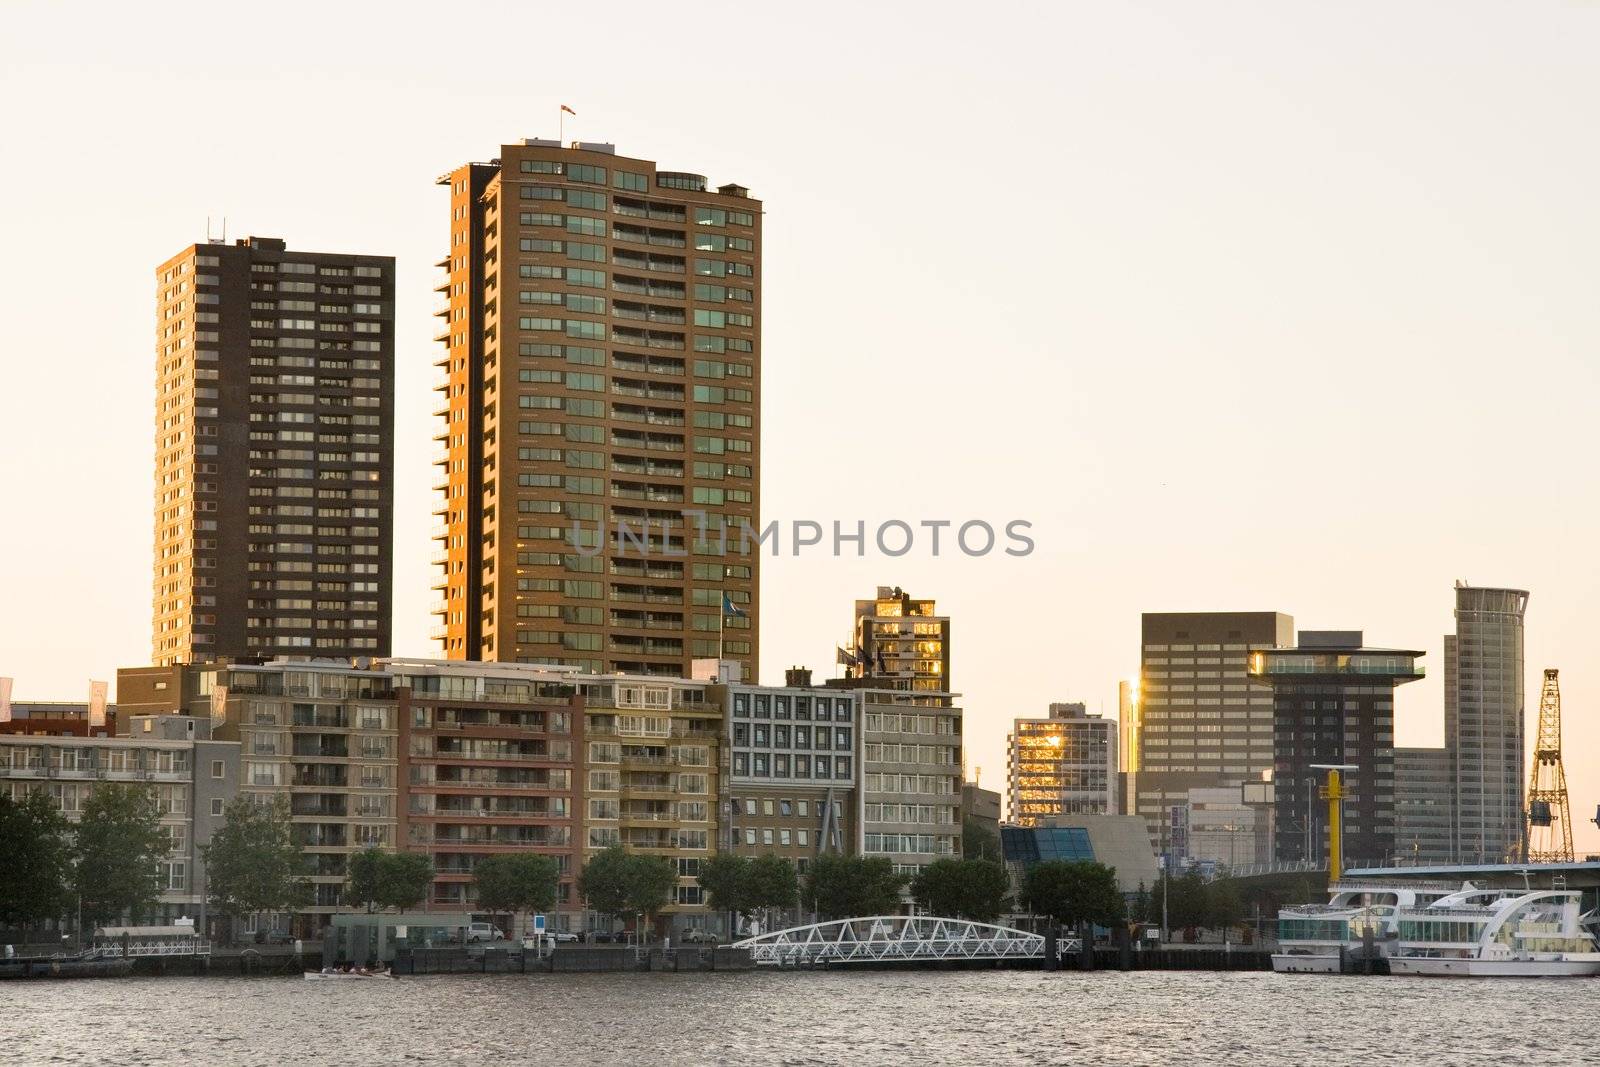 Residential buildings in Rotterdam at the riverside by late evening light